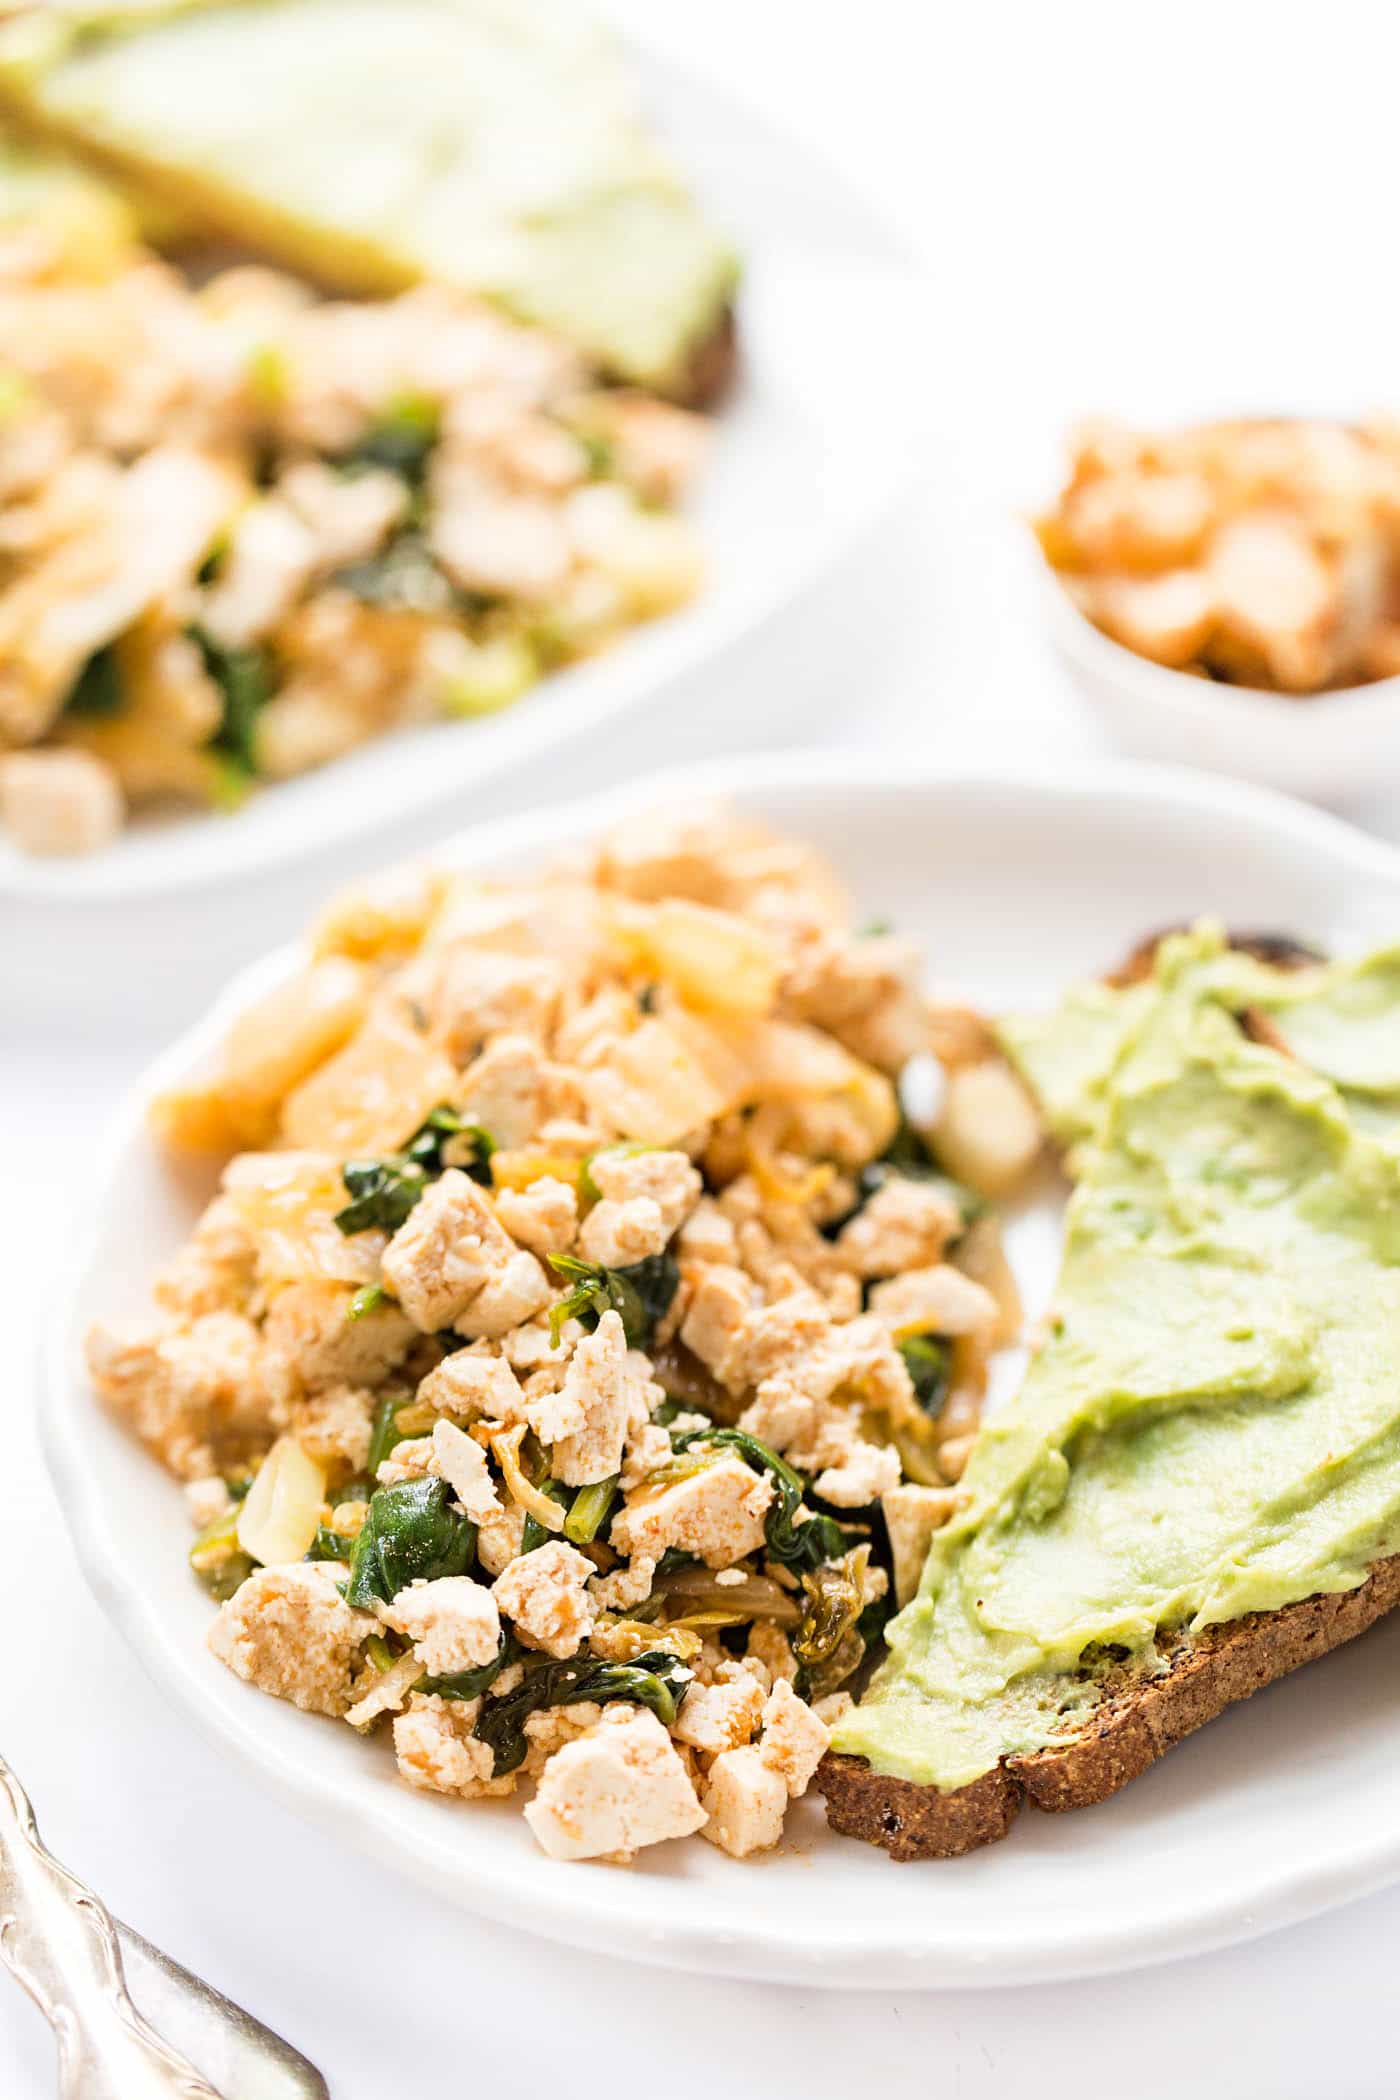 This Kimchi Tofu Scramble uses just 5 INGREDIENTS and takes only 5 minutes to make! [312 calories, 27g protein]